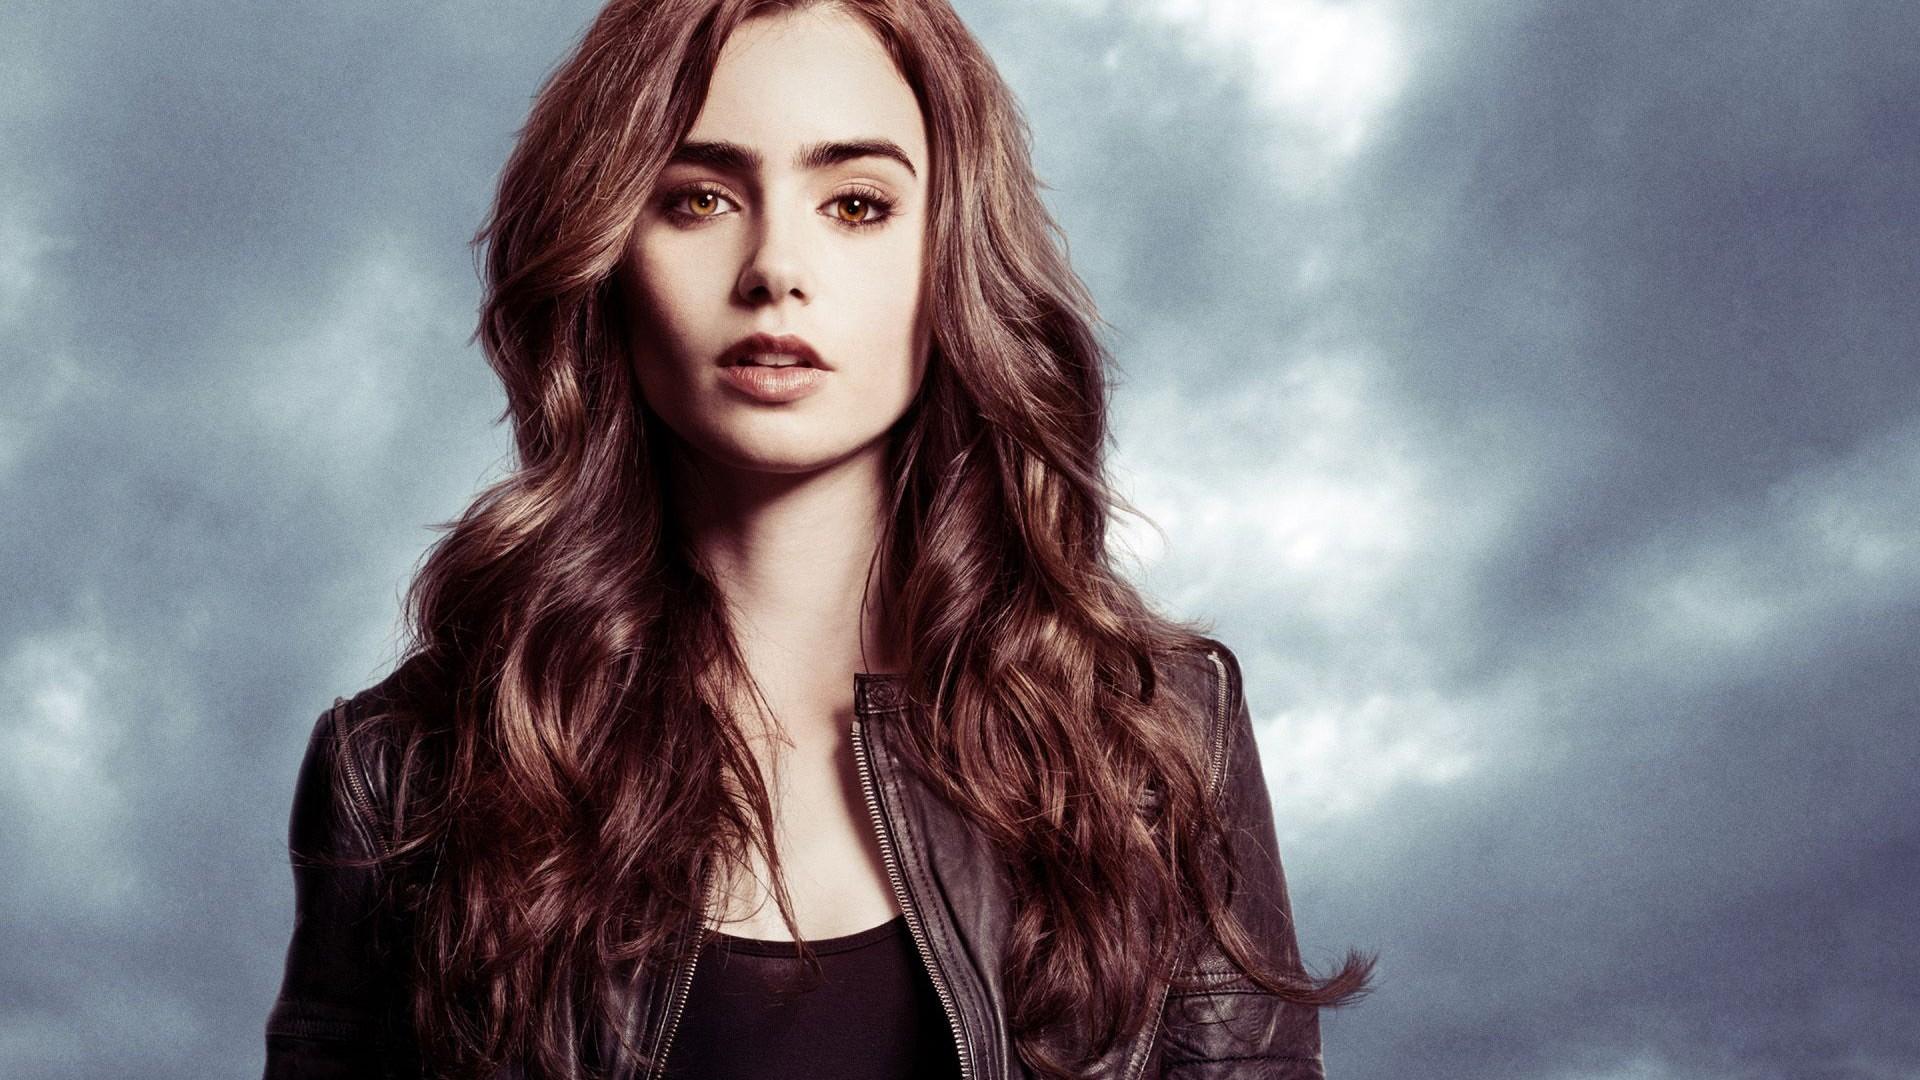 Wallpaper Blink of Lily Collins Wallpaper HD for Android